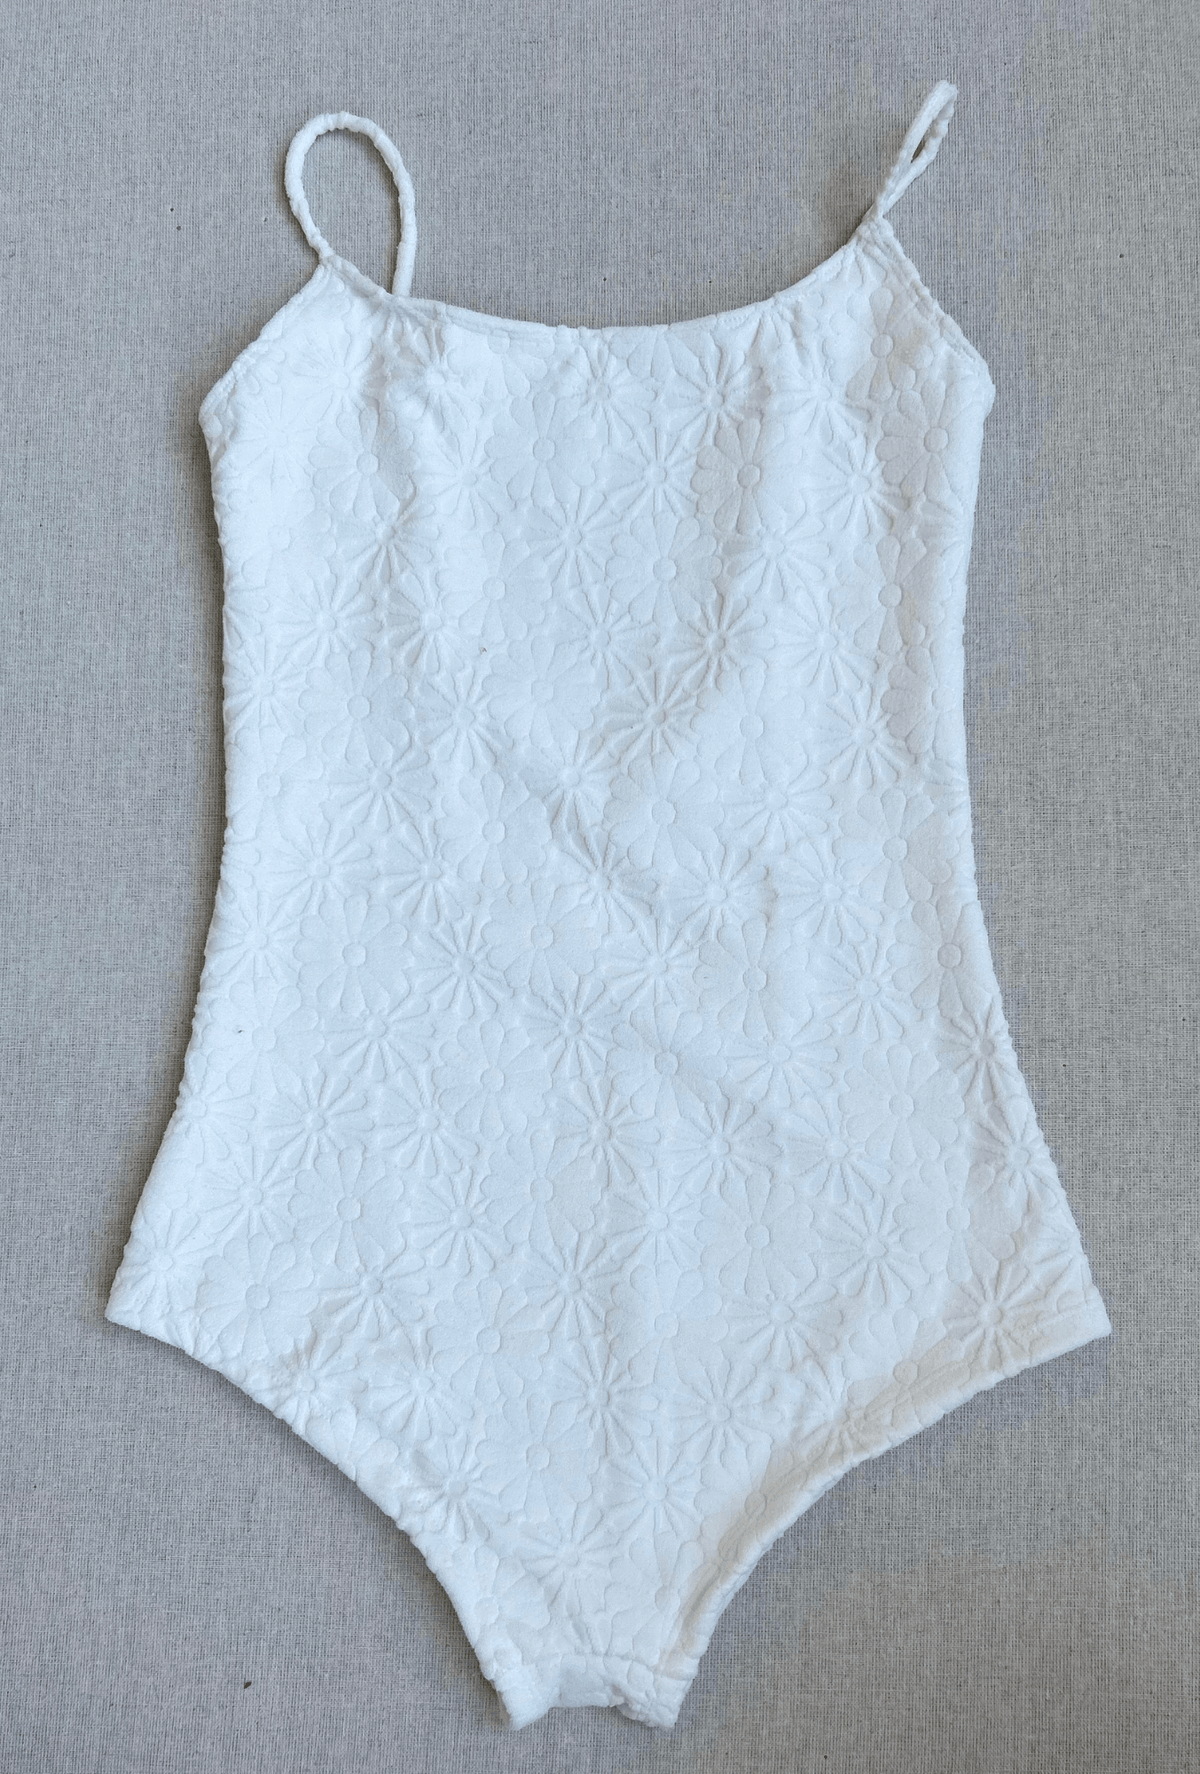 simple one piece in white daisy - size xs